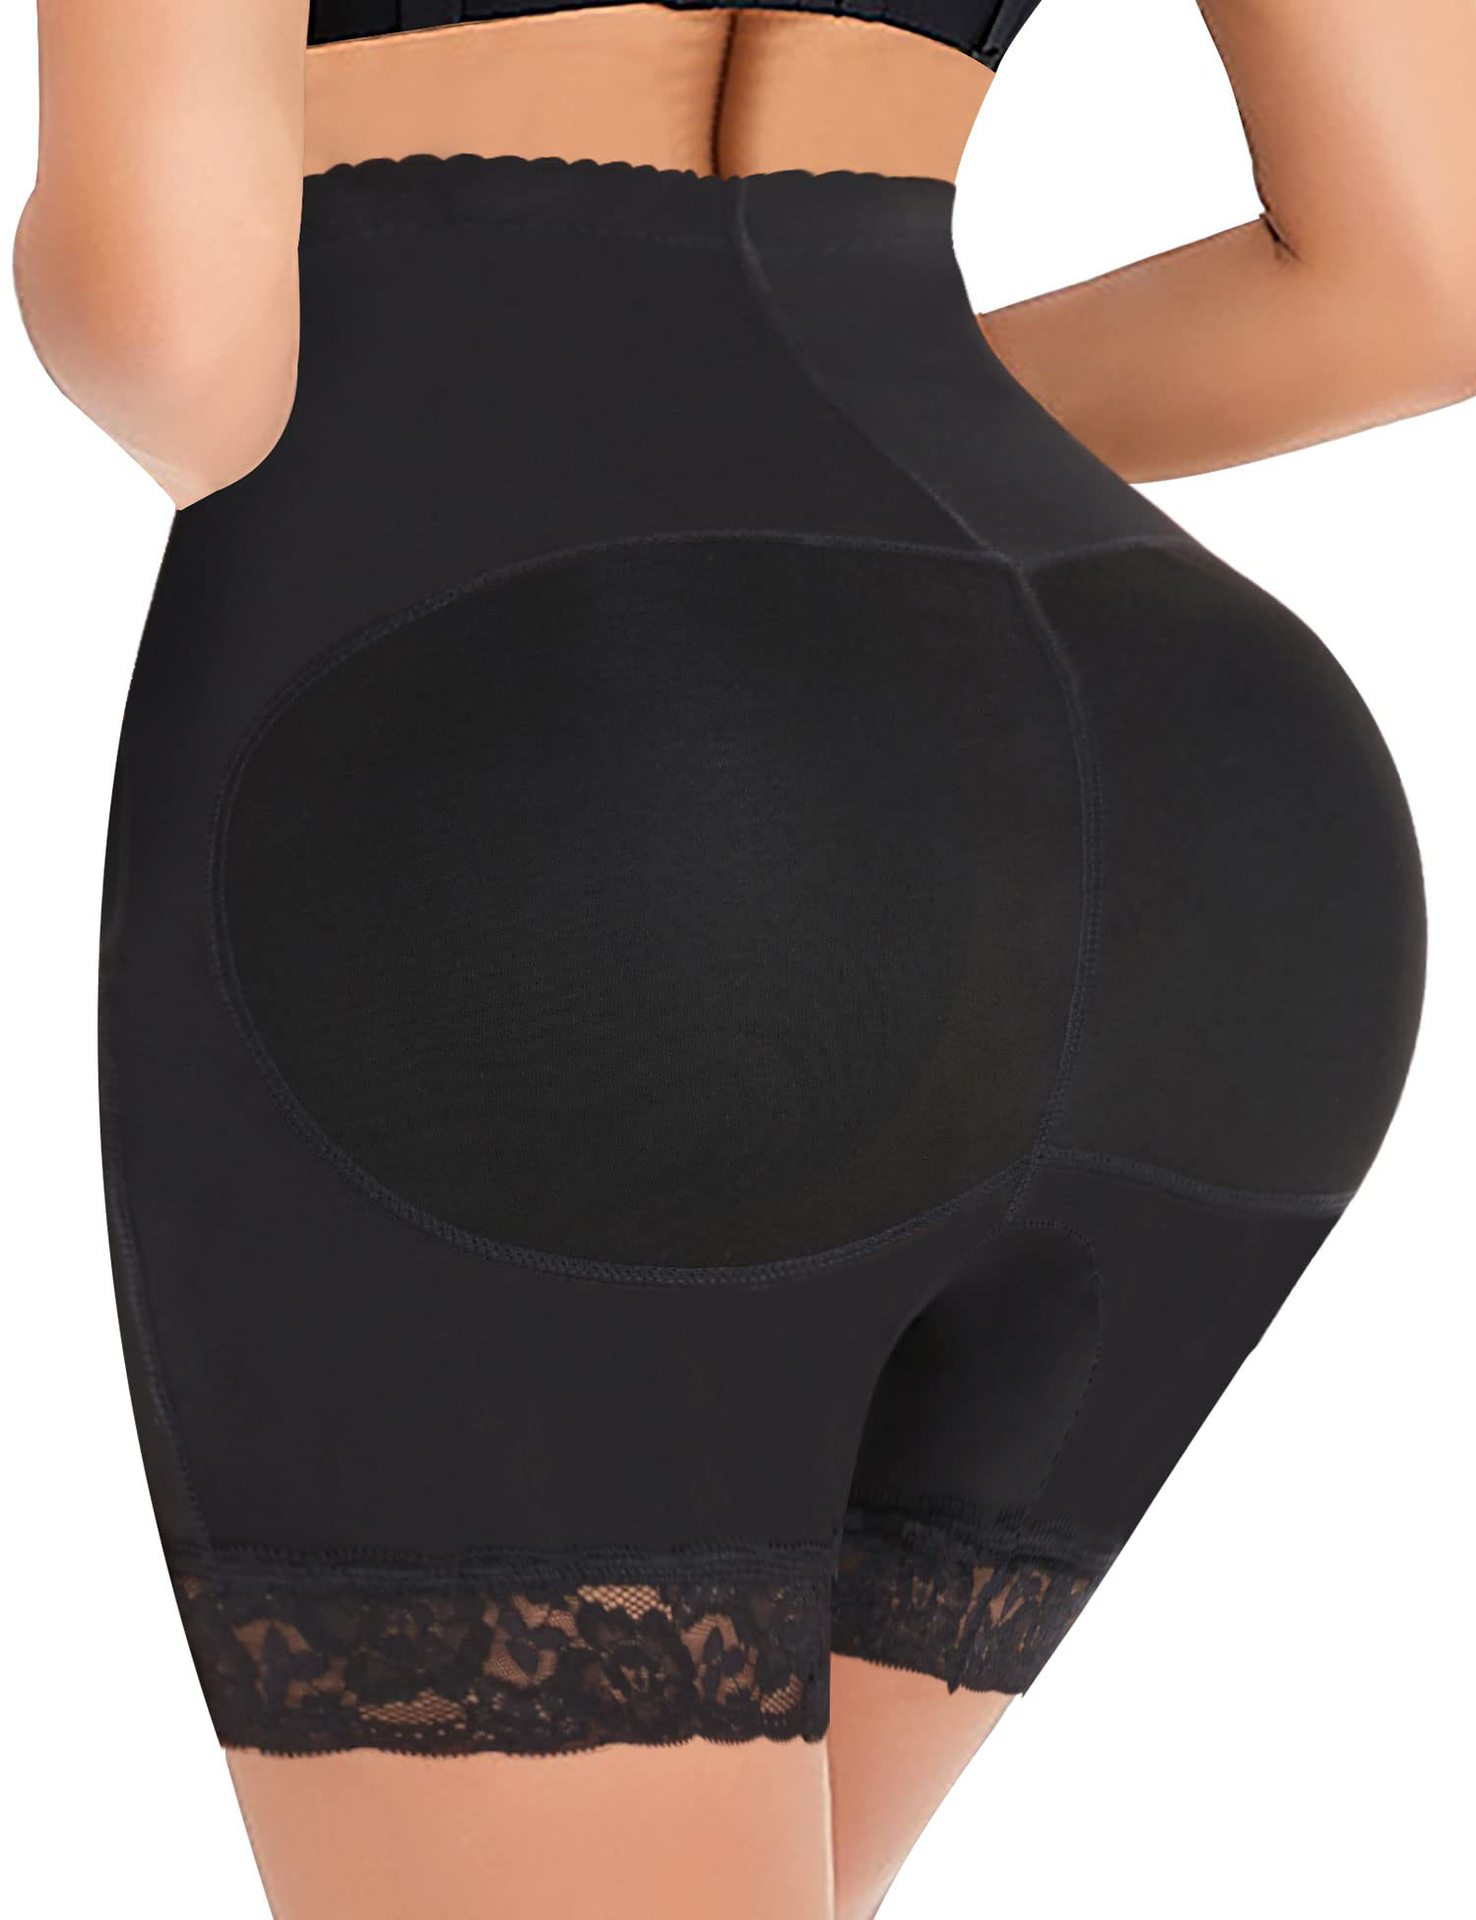 Latest Panty Girdle Lifting Tail with Lace on Sale-boldoversize